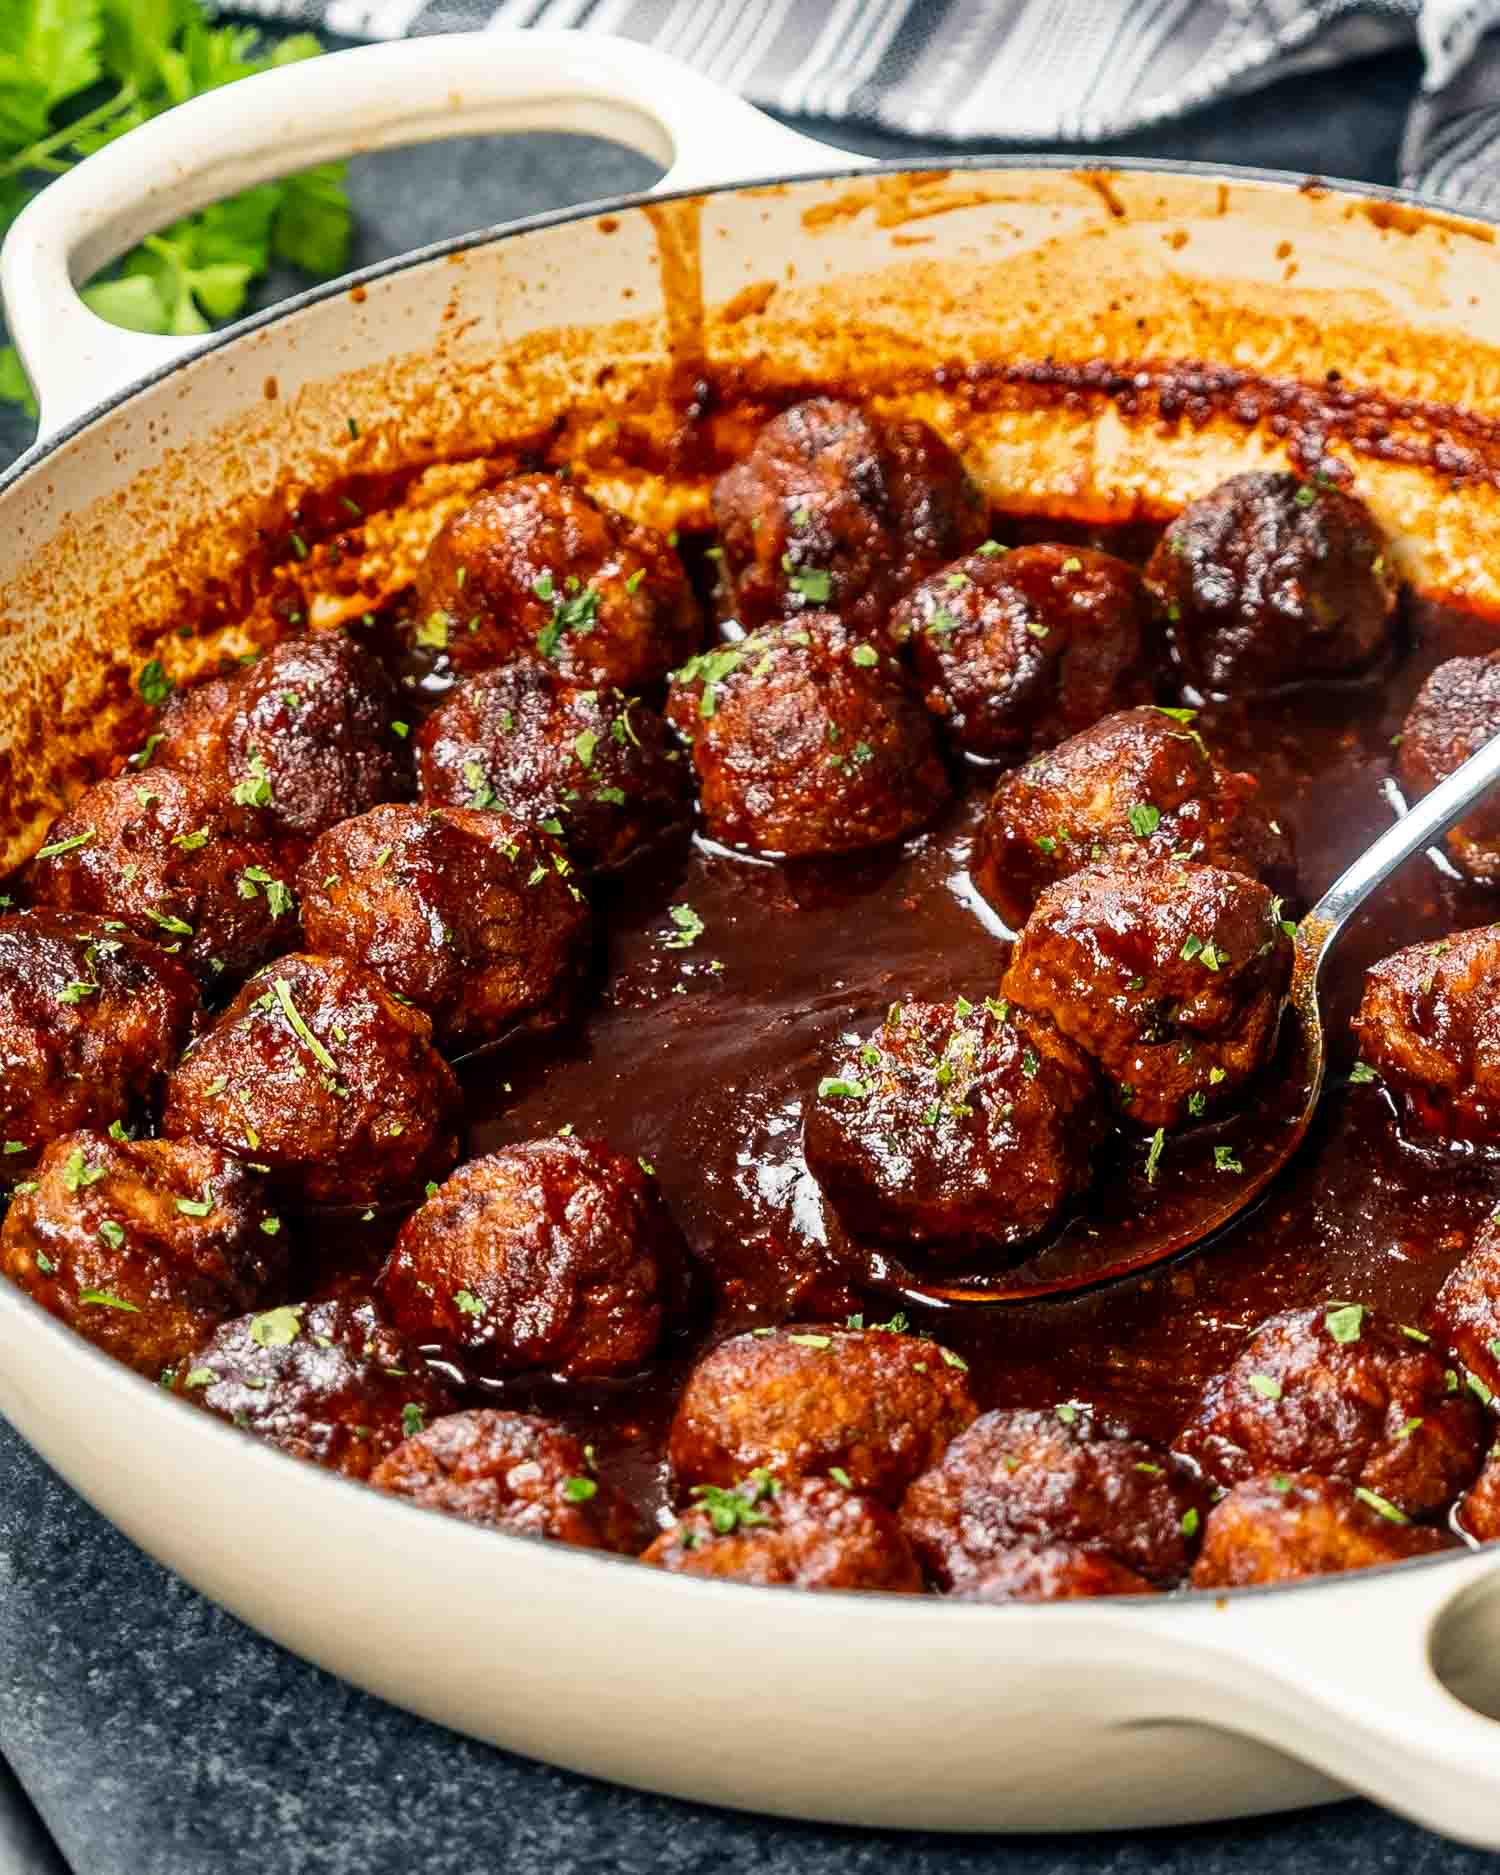 Savory stout meatballs, beautifully browned and simmering in a rich, smoky stout-infused BBQ sauce, served in a beige braiser, garnished with fresh parsley.